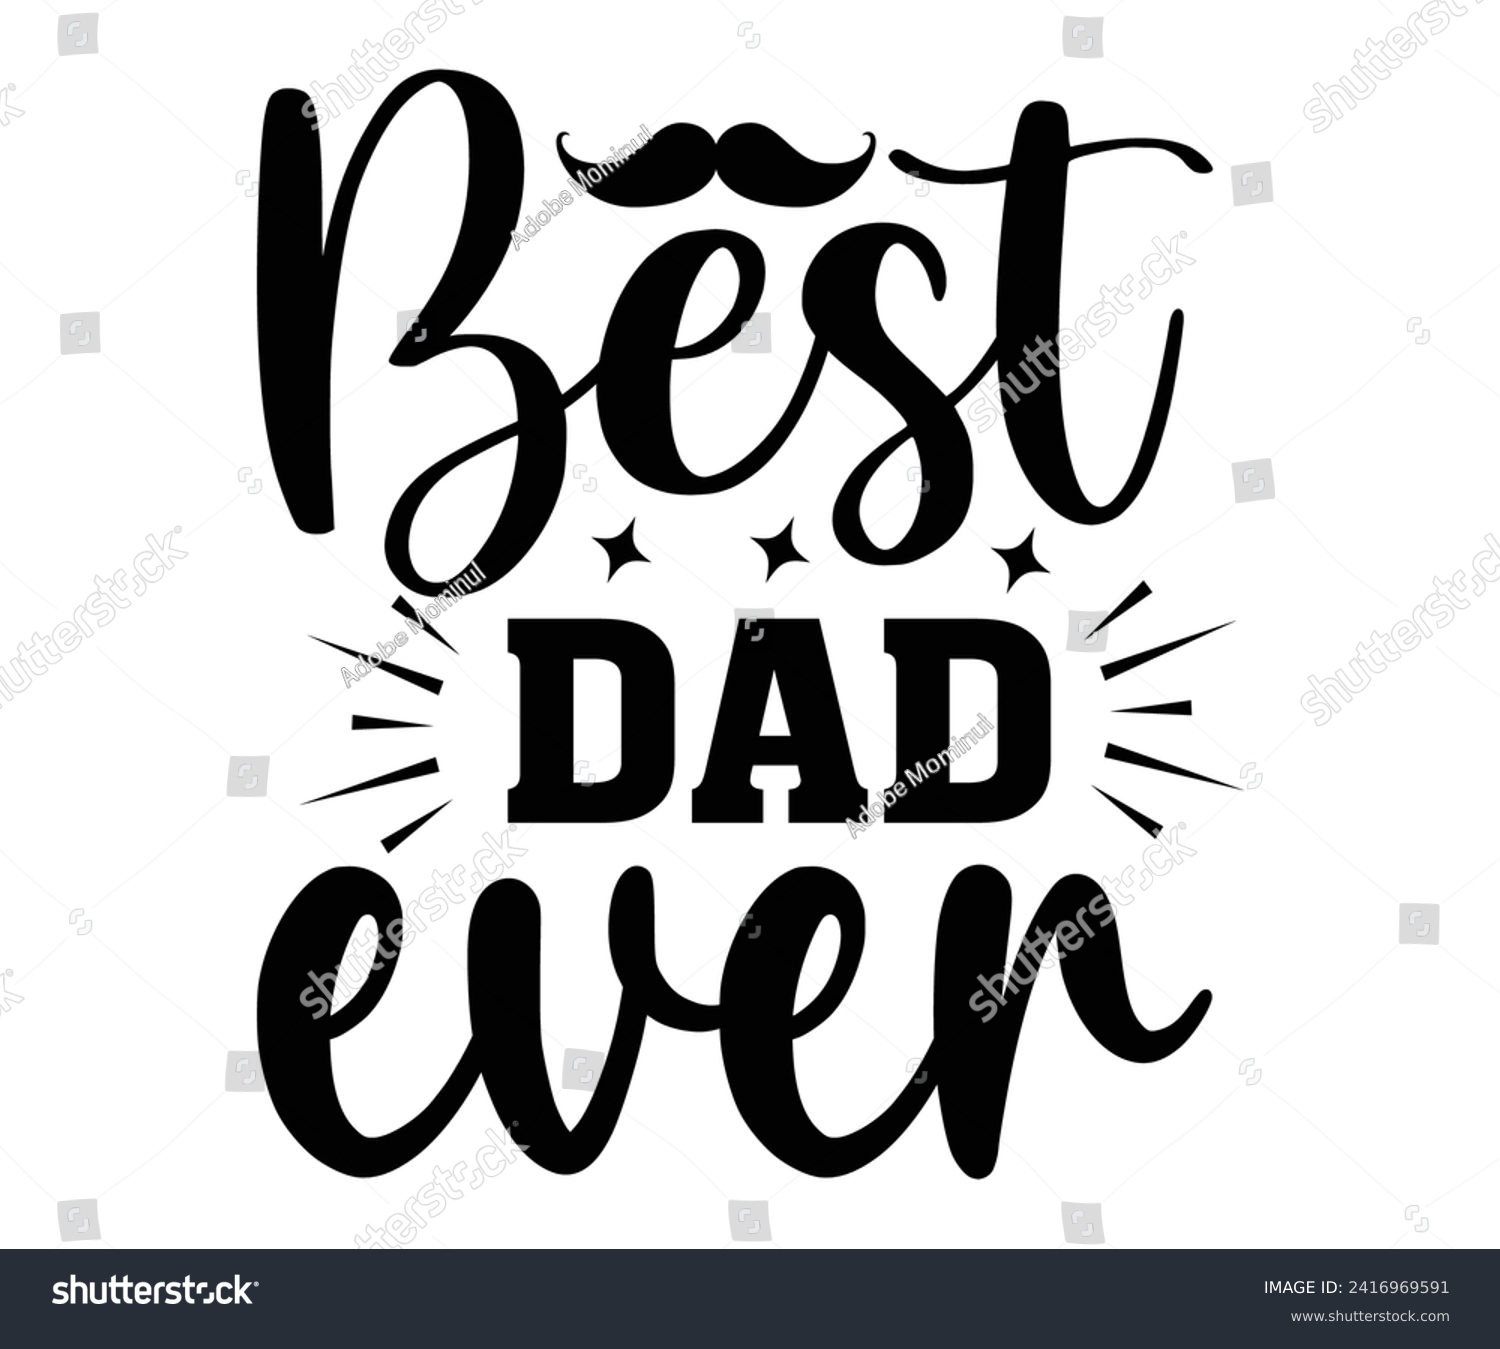 SVG of Best Dad Ever Svg,Father's Day Svg,Papa svg,Grandpa Svg,Father's Day Saying Qoutes,Dad Svg,Funny Father, Gift For Dad Svg,Daddy Svg,Family Svg,T shirt Design,Svg Cut File,Typography svg